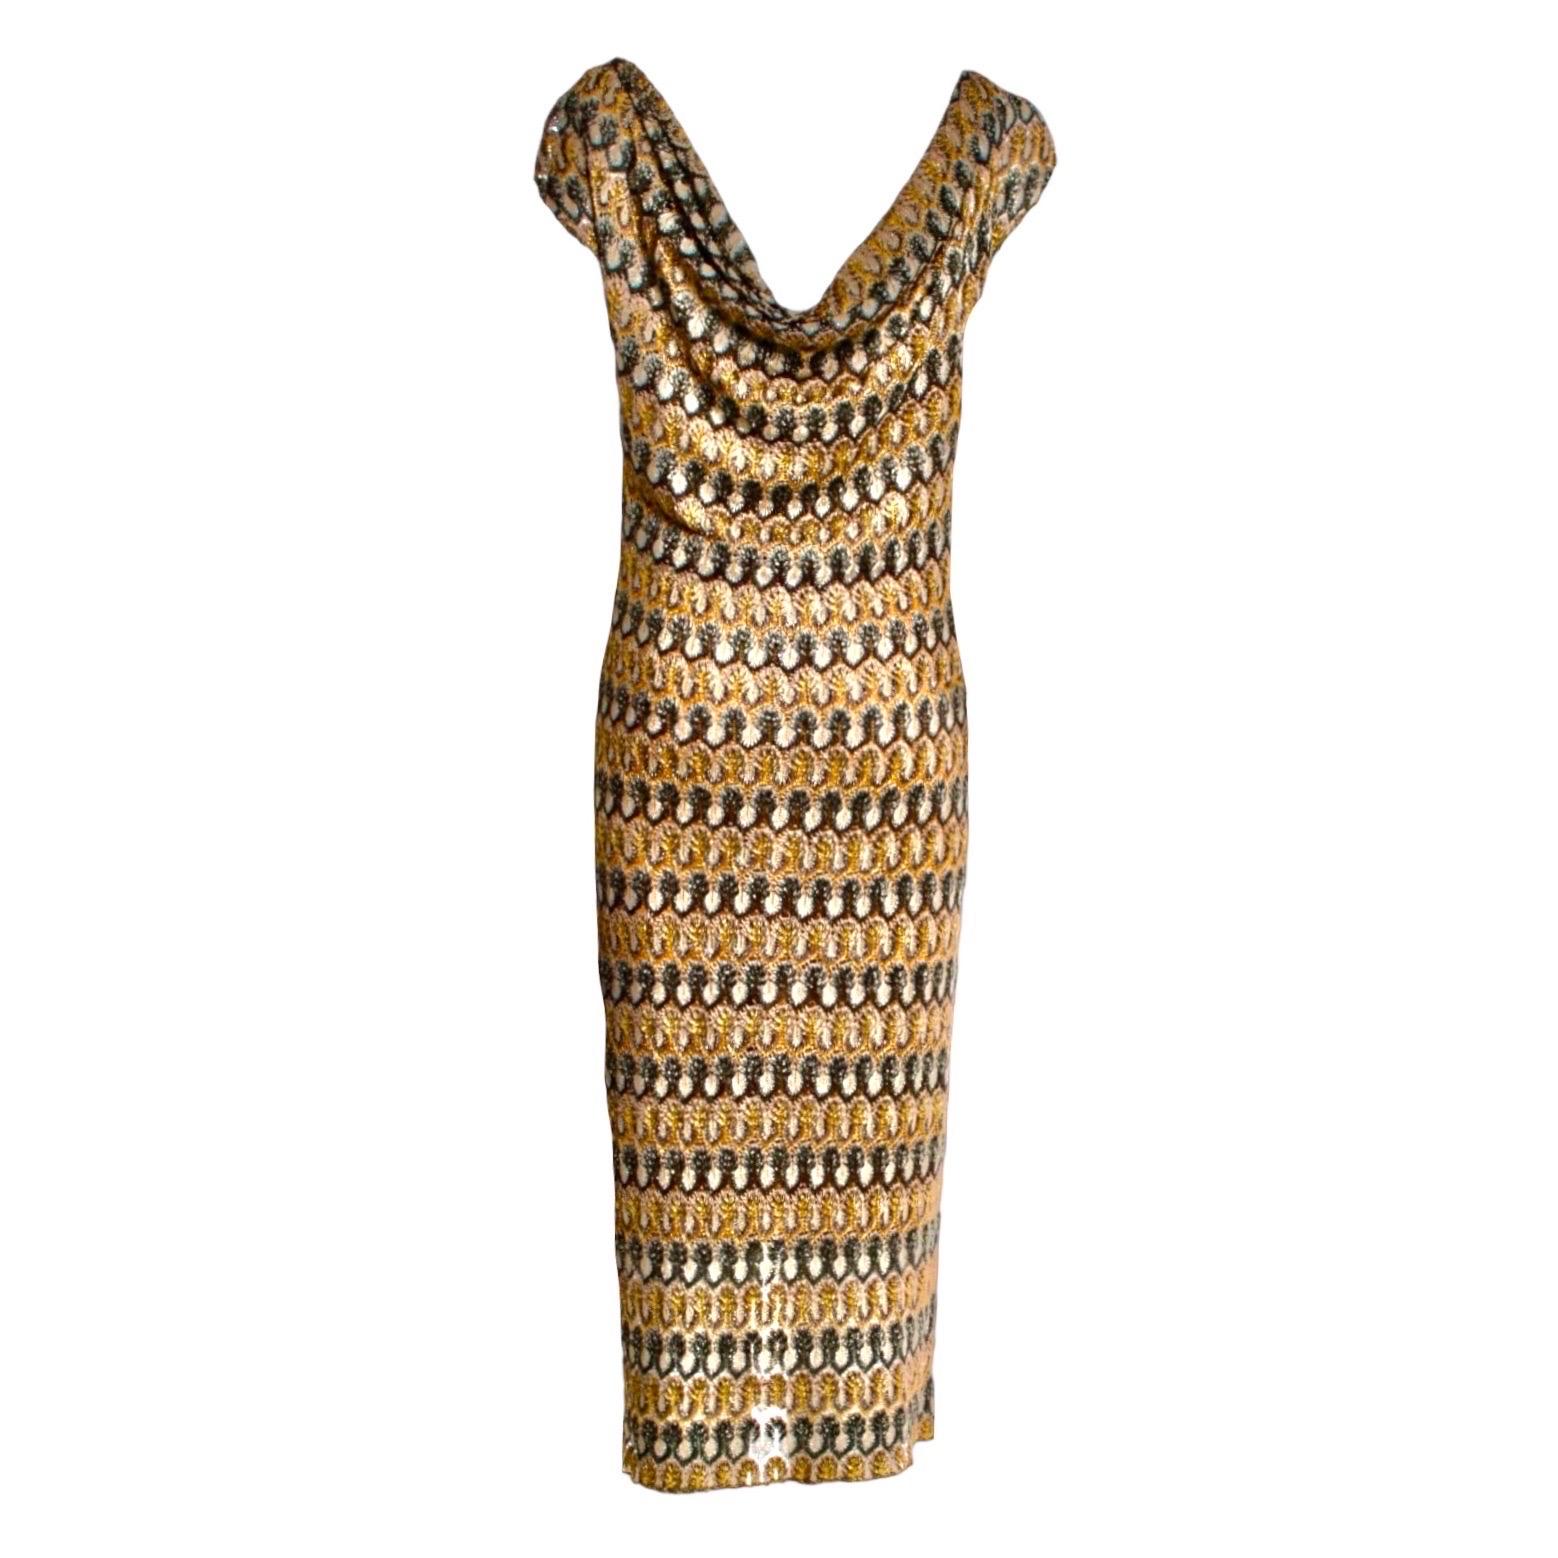 Cut a stylish silhouette in Missoni's multicolored Lurex-knit maxi dress with draped neckline.

A fantastic Missoni Crochet Knit Evening Gown
Draped top
Beautiful golden metallic crochet knit fabric with lurex thread
Includes silk slip dress (can be